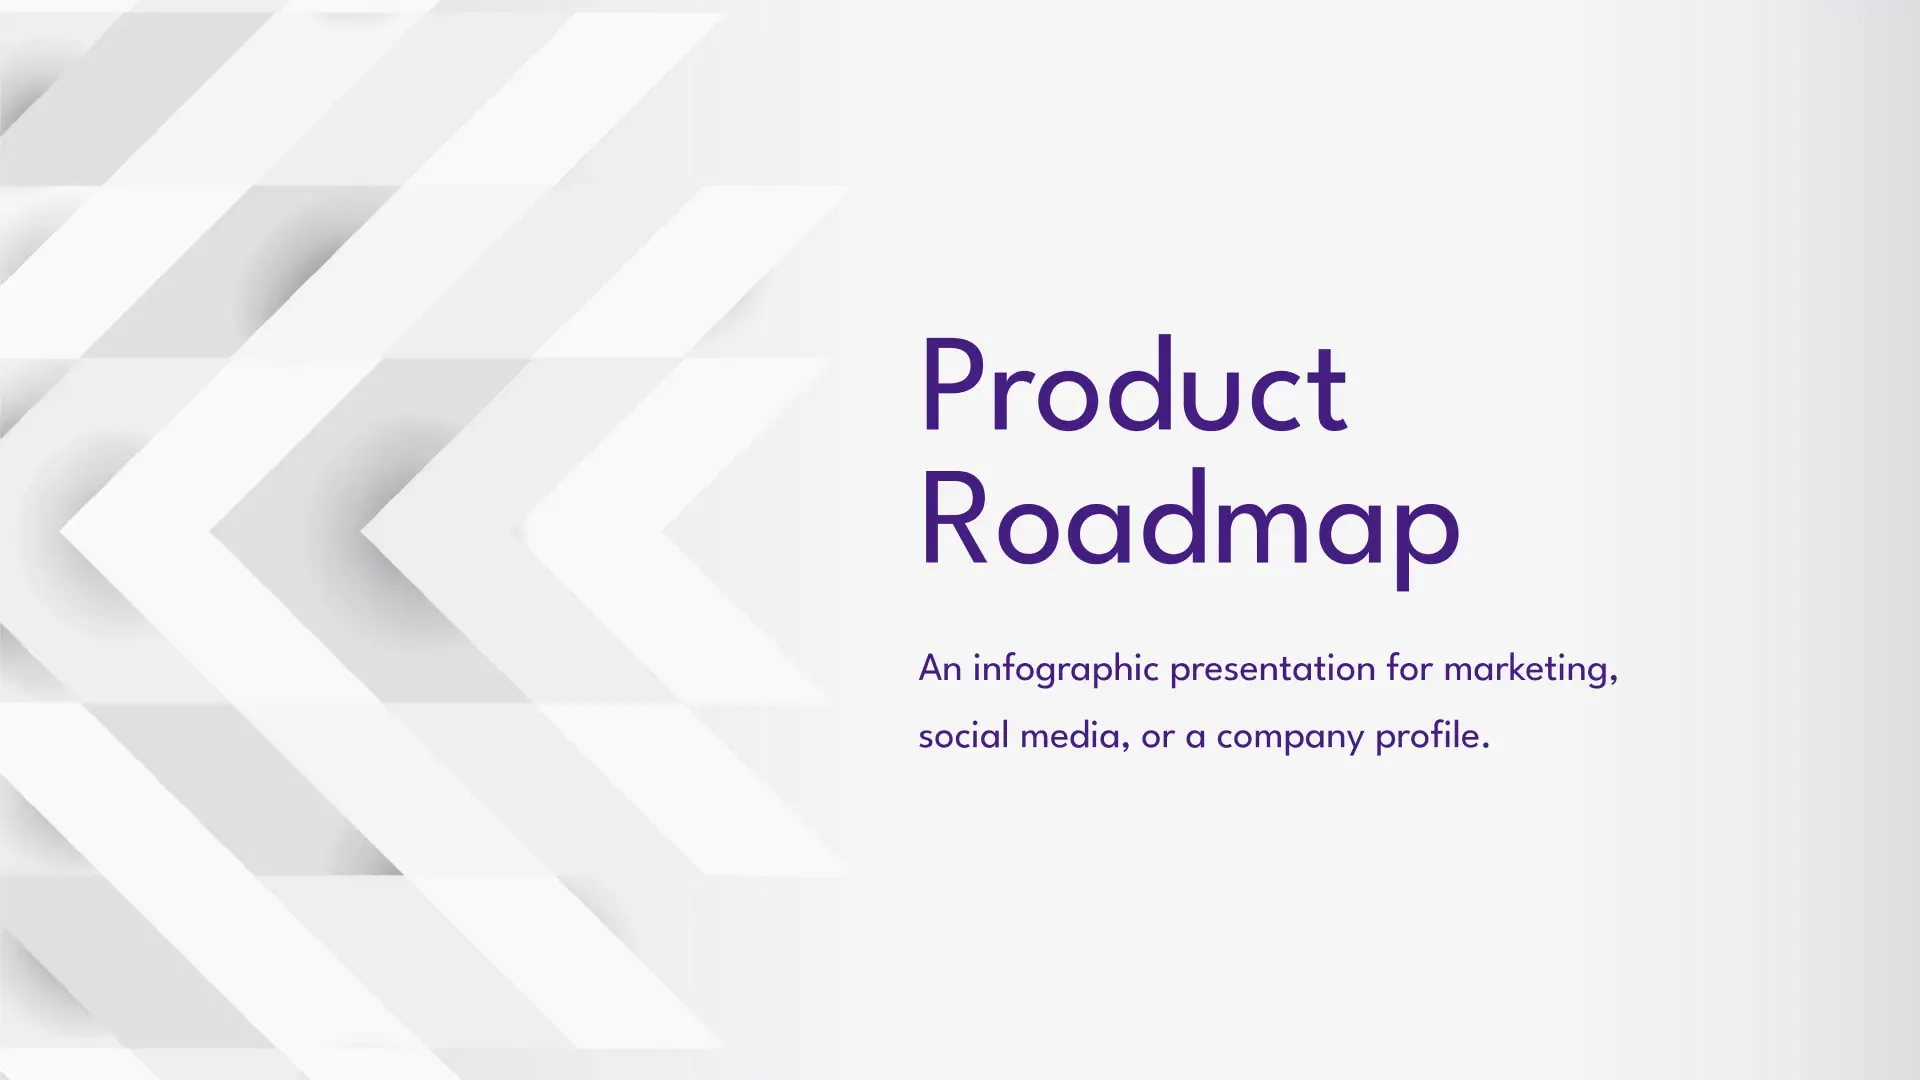 Product Roadmap Template